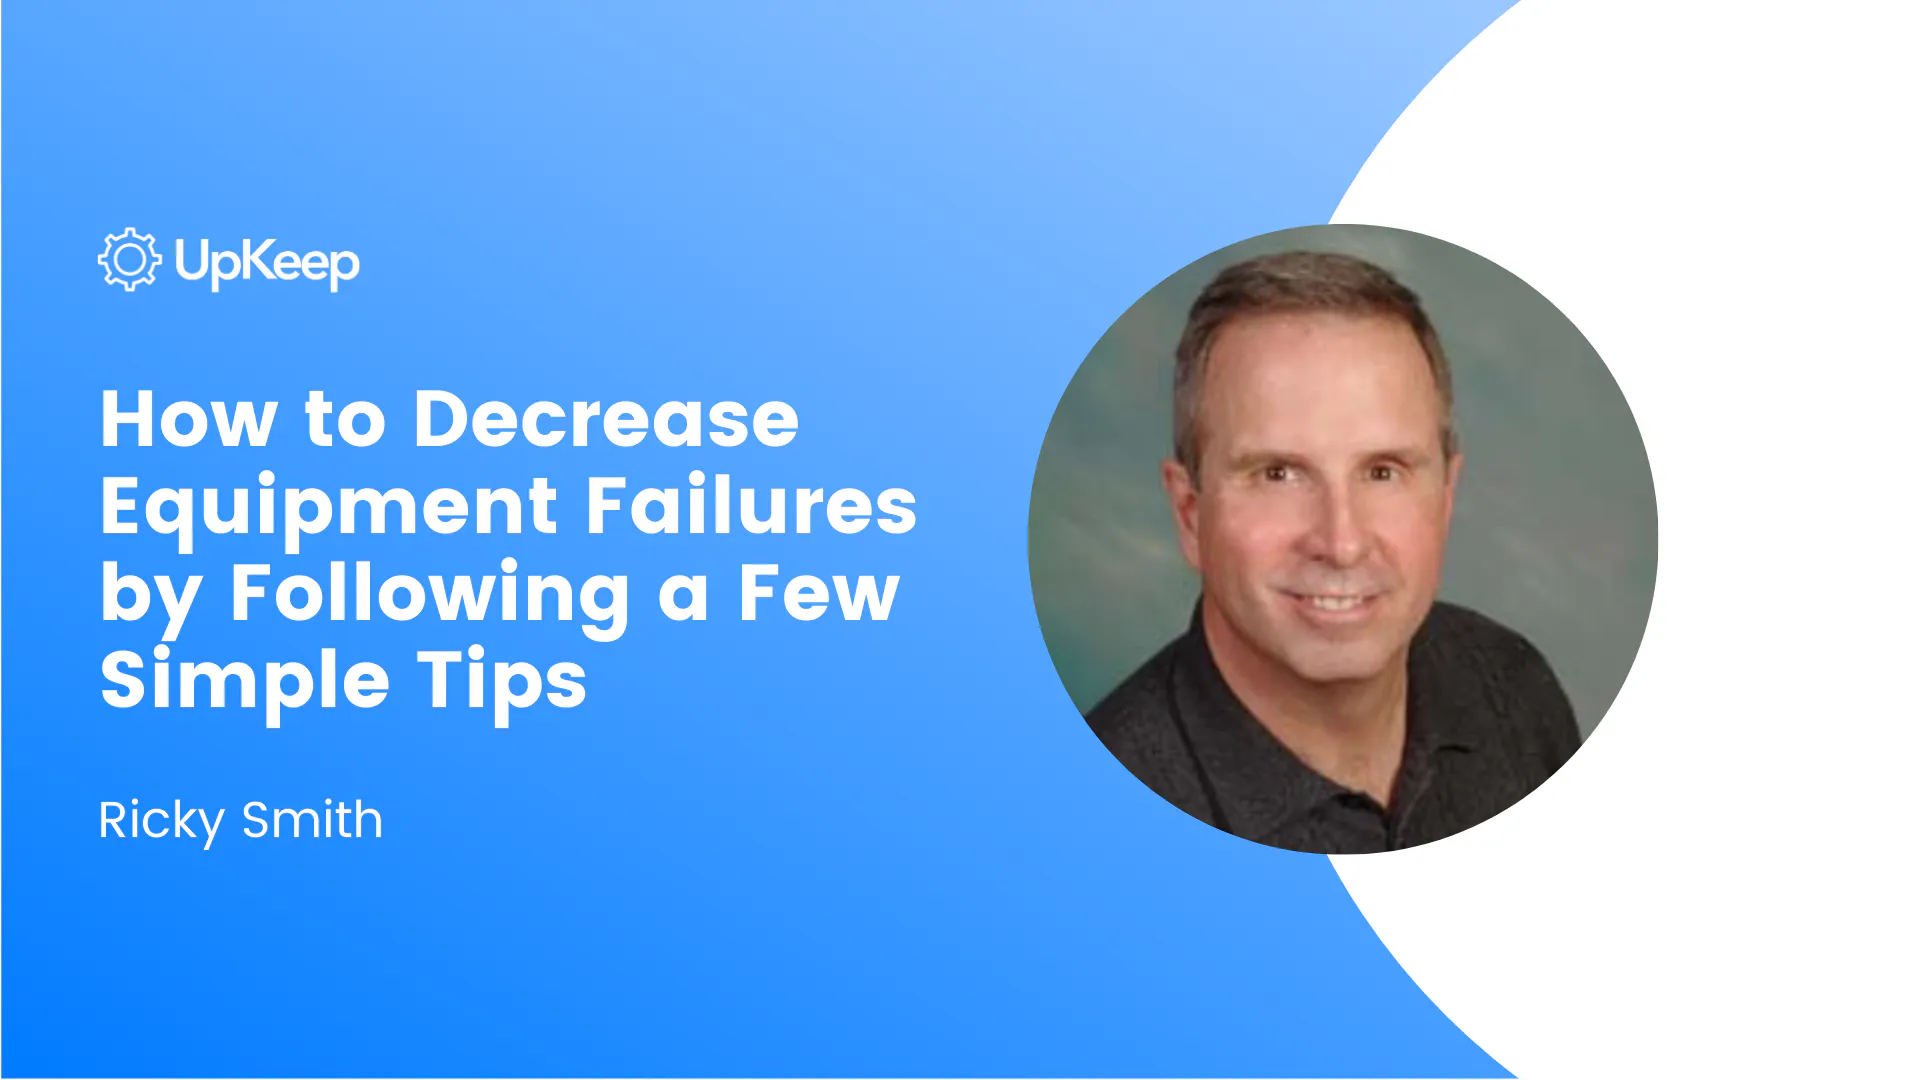 How to Decrease Equipment Failures by Following a Few Simple Tips